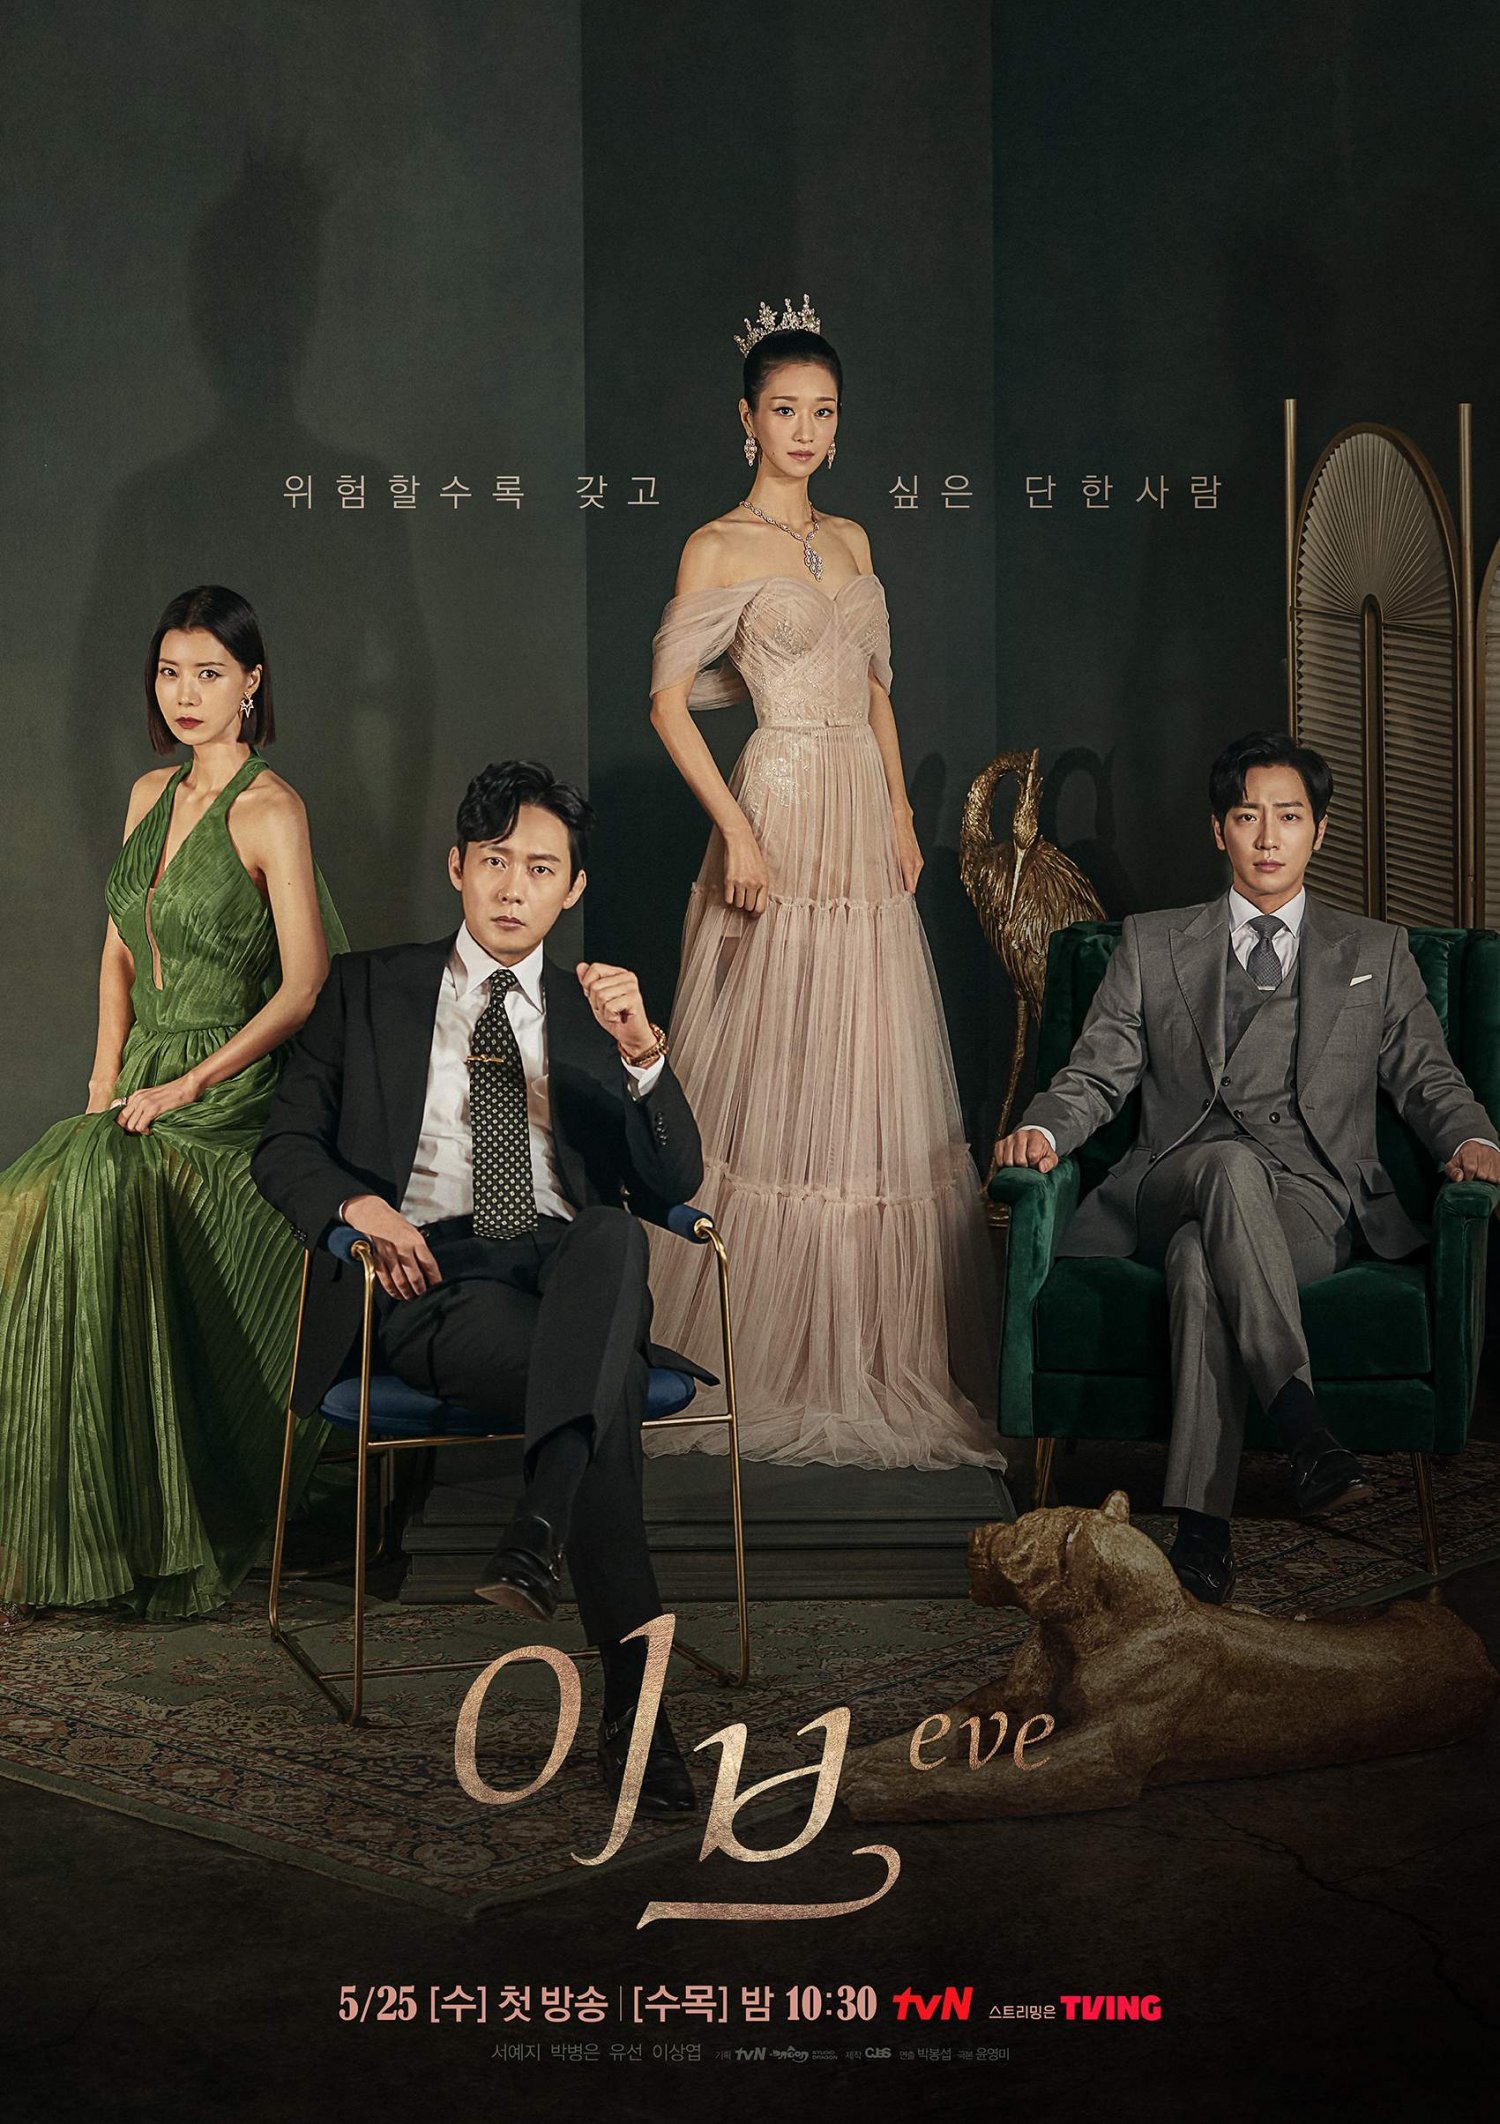 Photo] New Poster Added for the Upcoming Korean Drama 'Eve' @ HanCinema